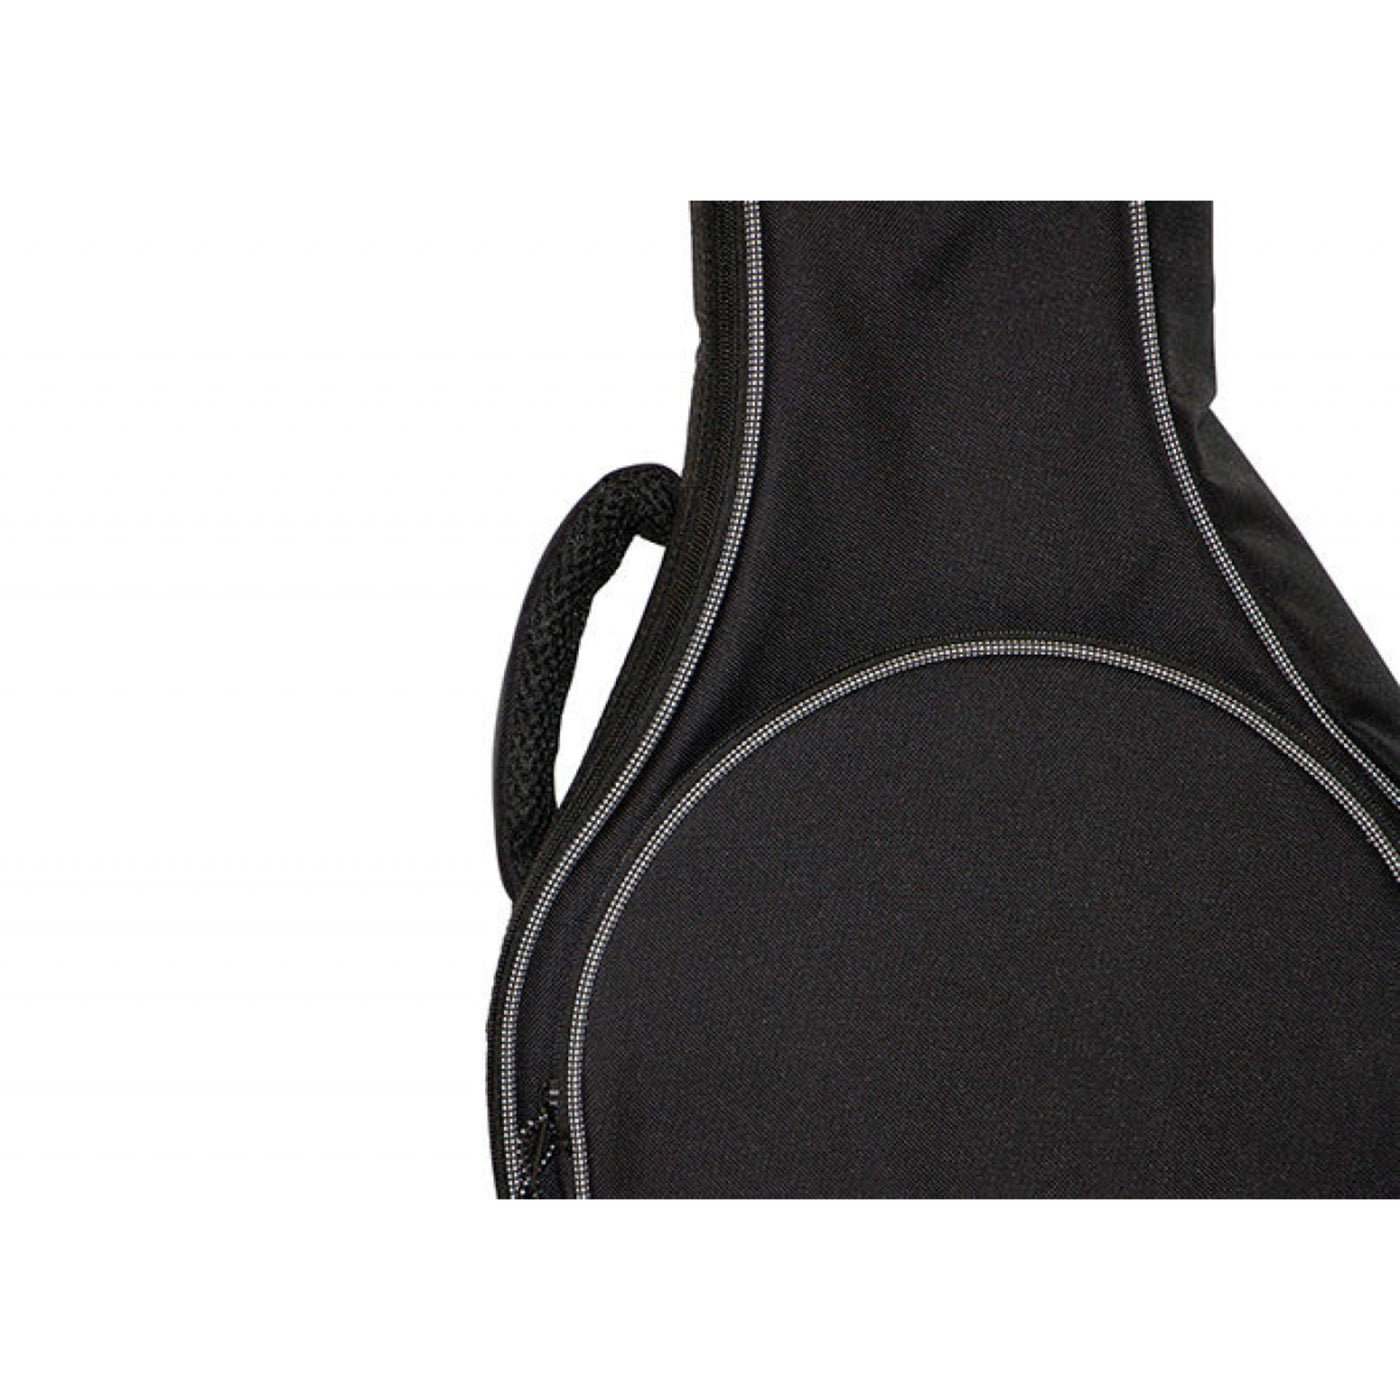 On-Stage Water-Resistant Padded Mandolin Bag  (GBM4770B)